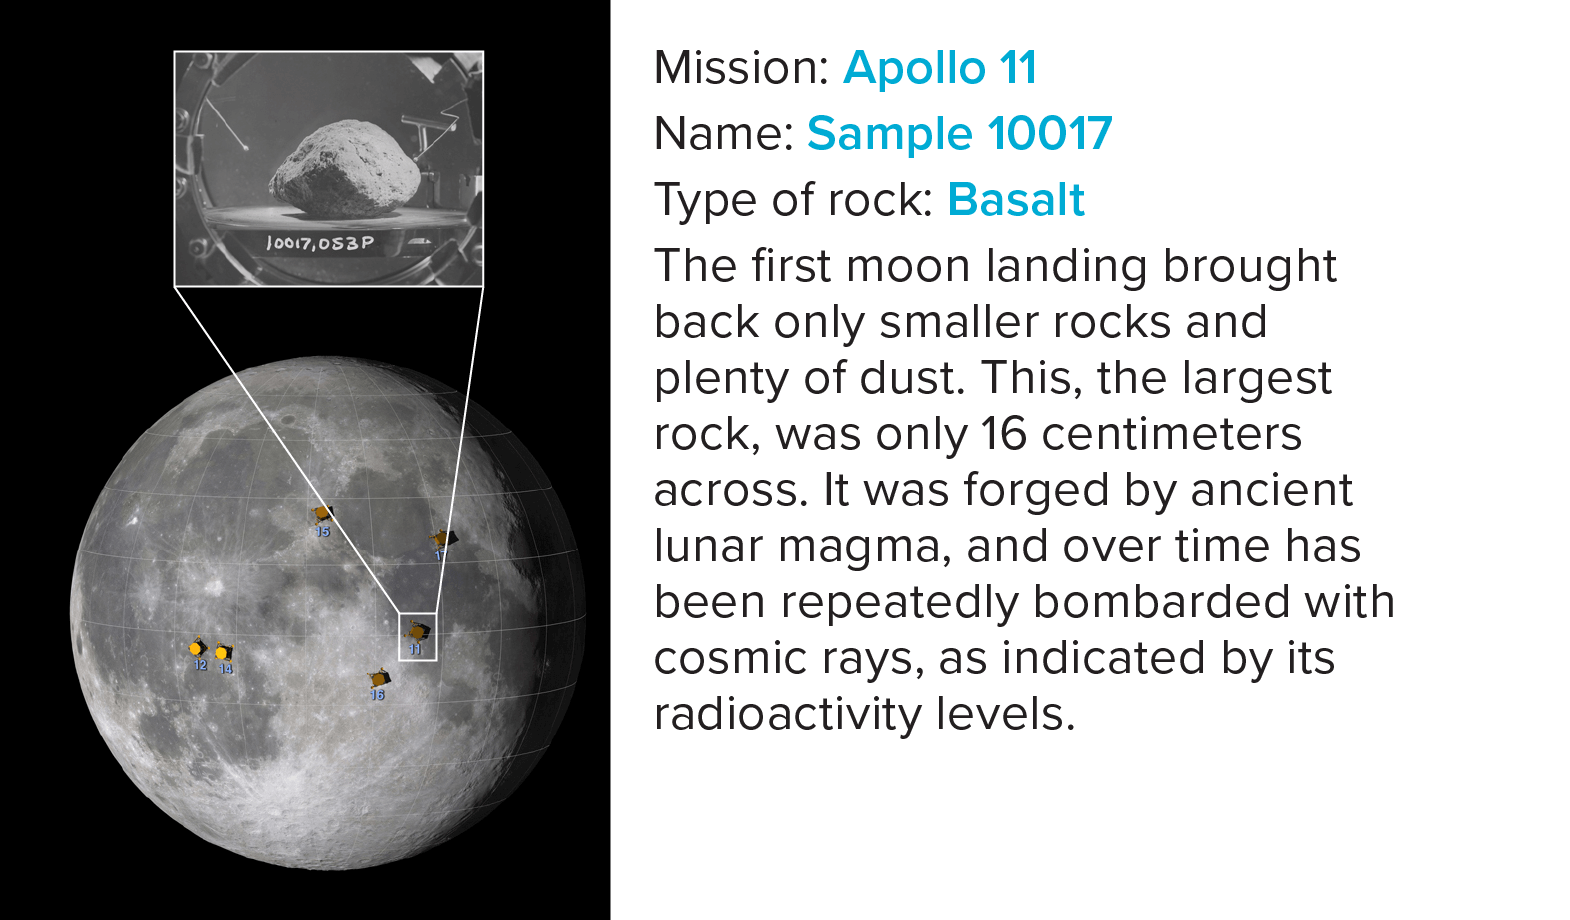 The first moon landing brought back only smaller rocks and plenty of dust. This, the largest rock, was only 16 centimeters across. The sample was forged by ancient lunar magma, and over time has been repeatedly bombarded with cosmic rays, as indicated by its radioactivity levels. 